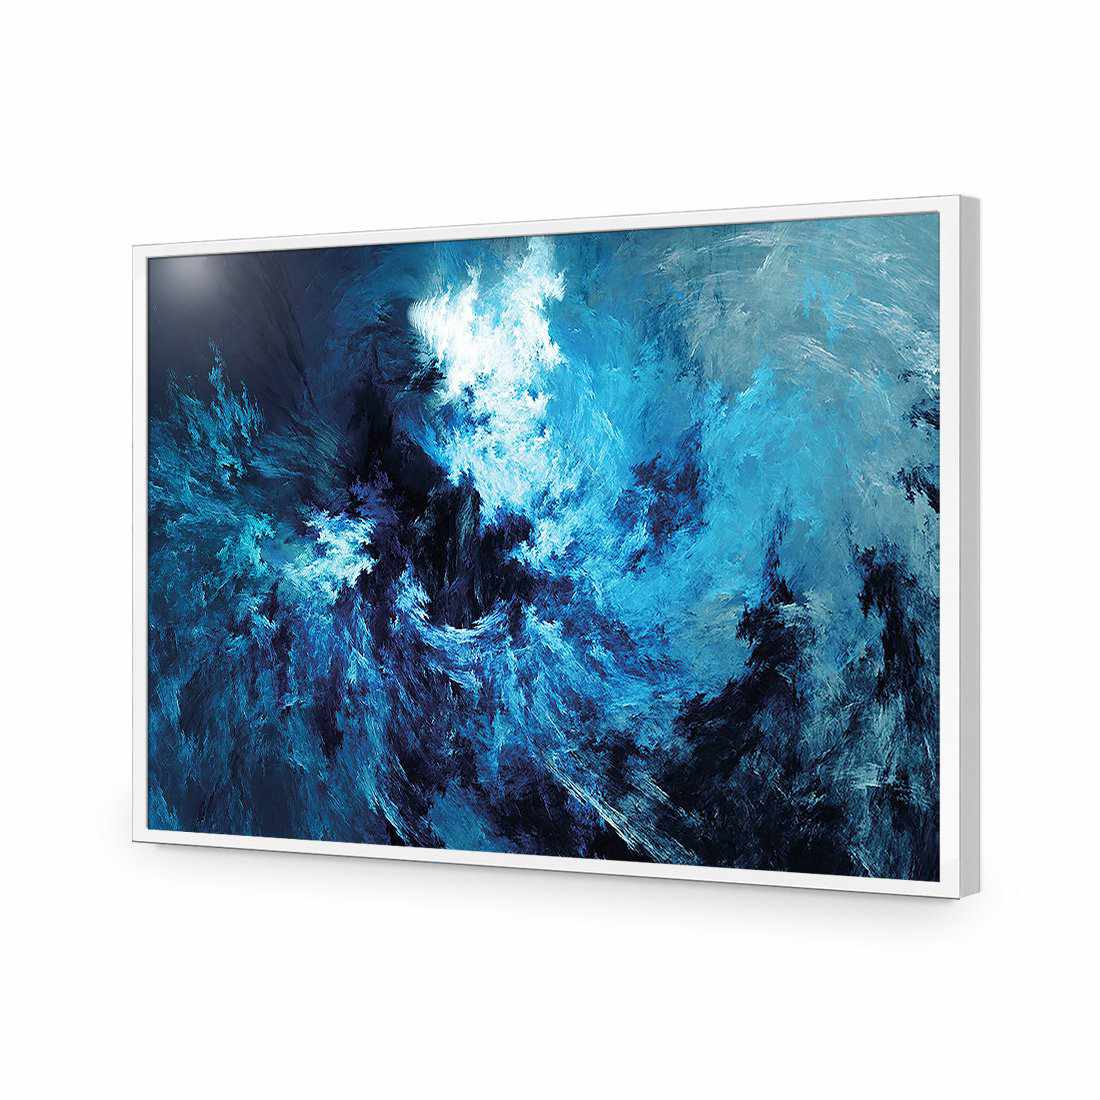 Into the Storm-Acrylic-Wall Art Design-Without Border-Acrylic - White Frame-45x30cm-Wall Art Designs